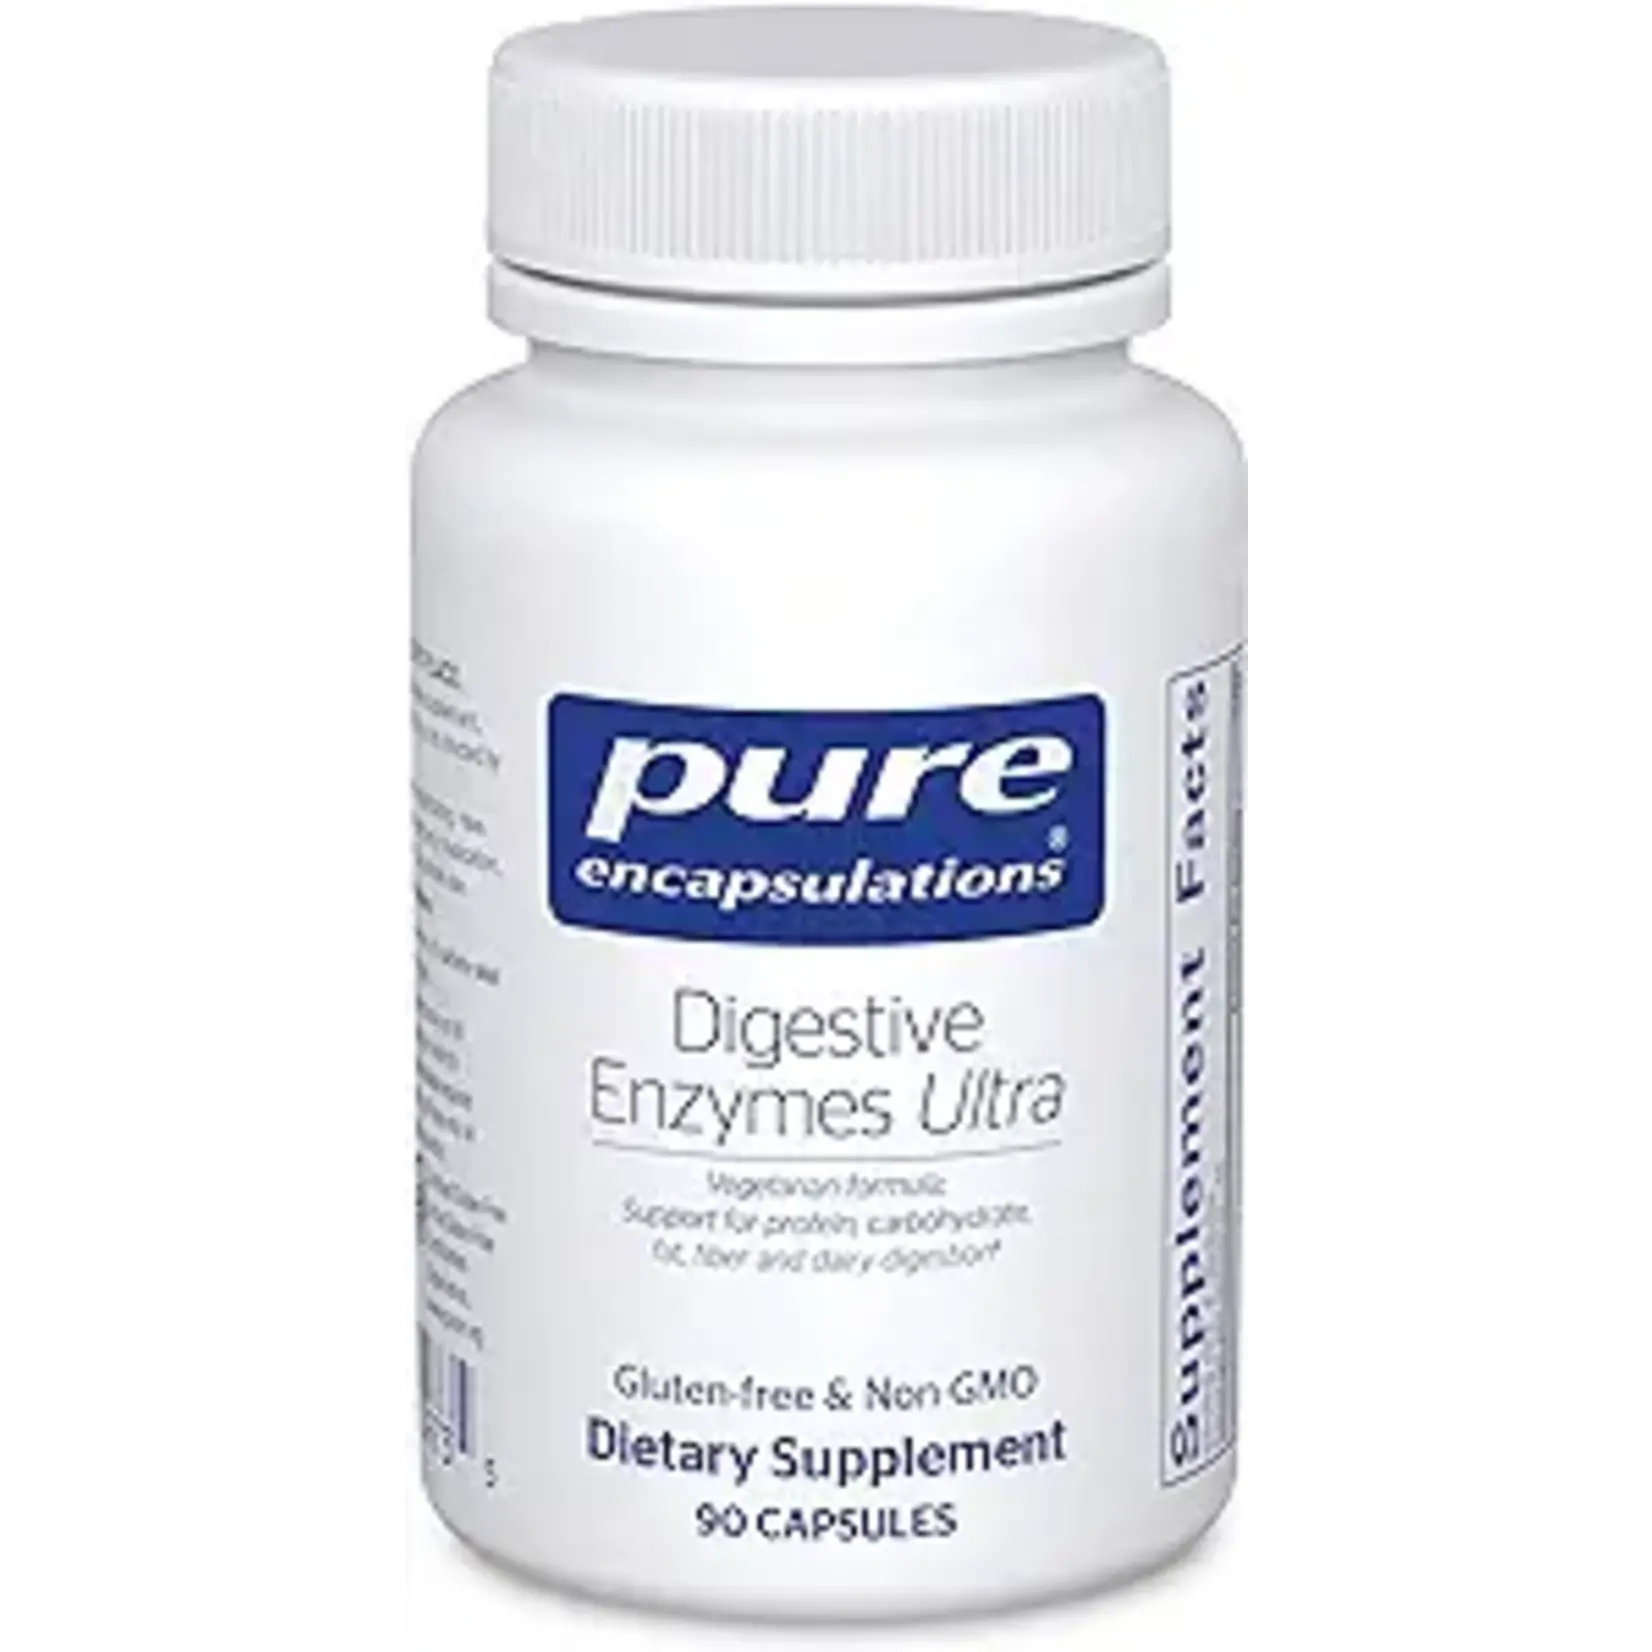 Pure Encapsulations Digestive Enzymes Ultra (Pure)